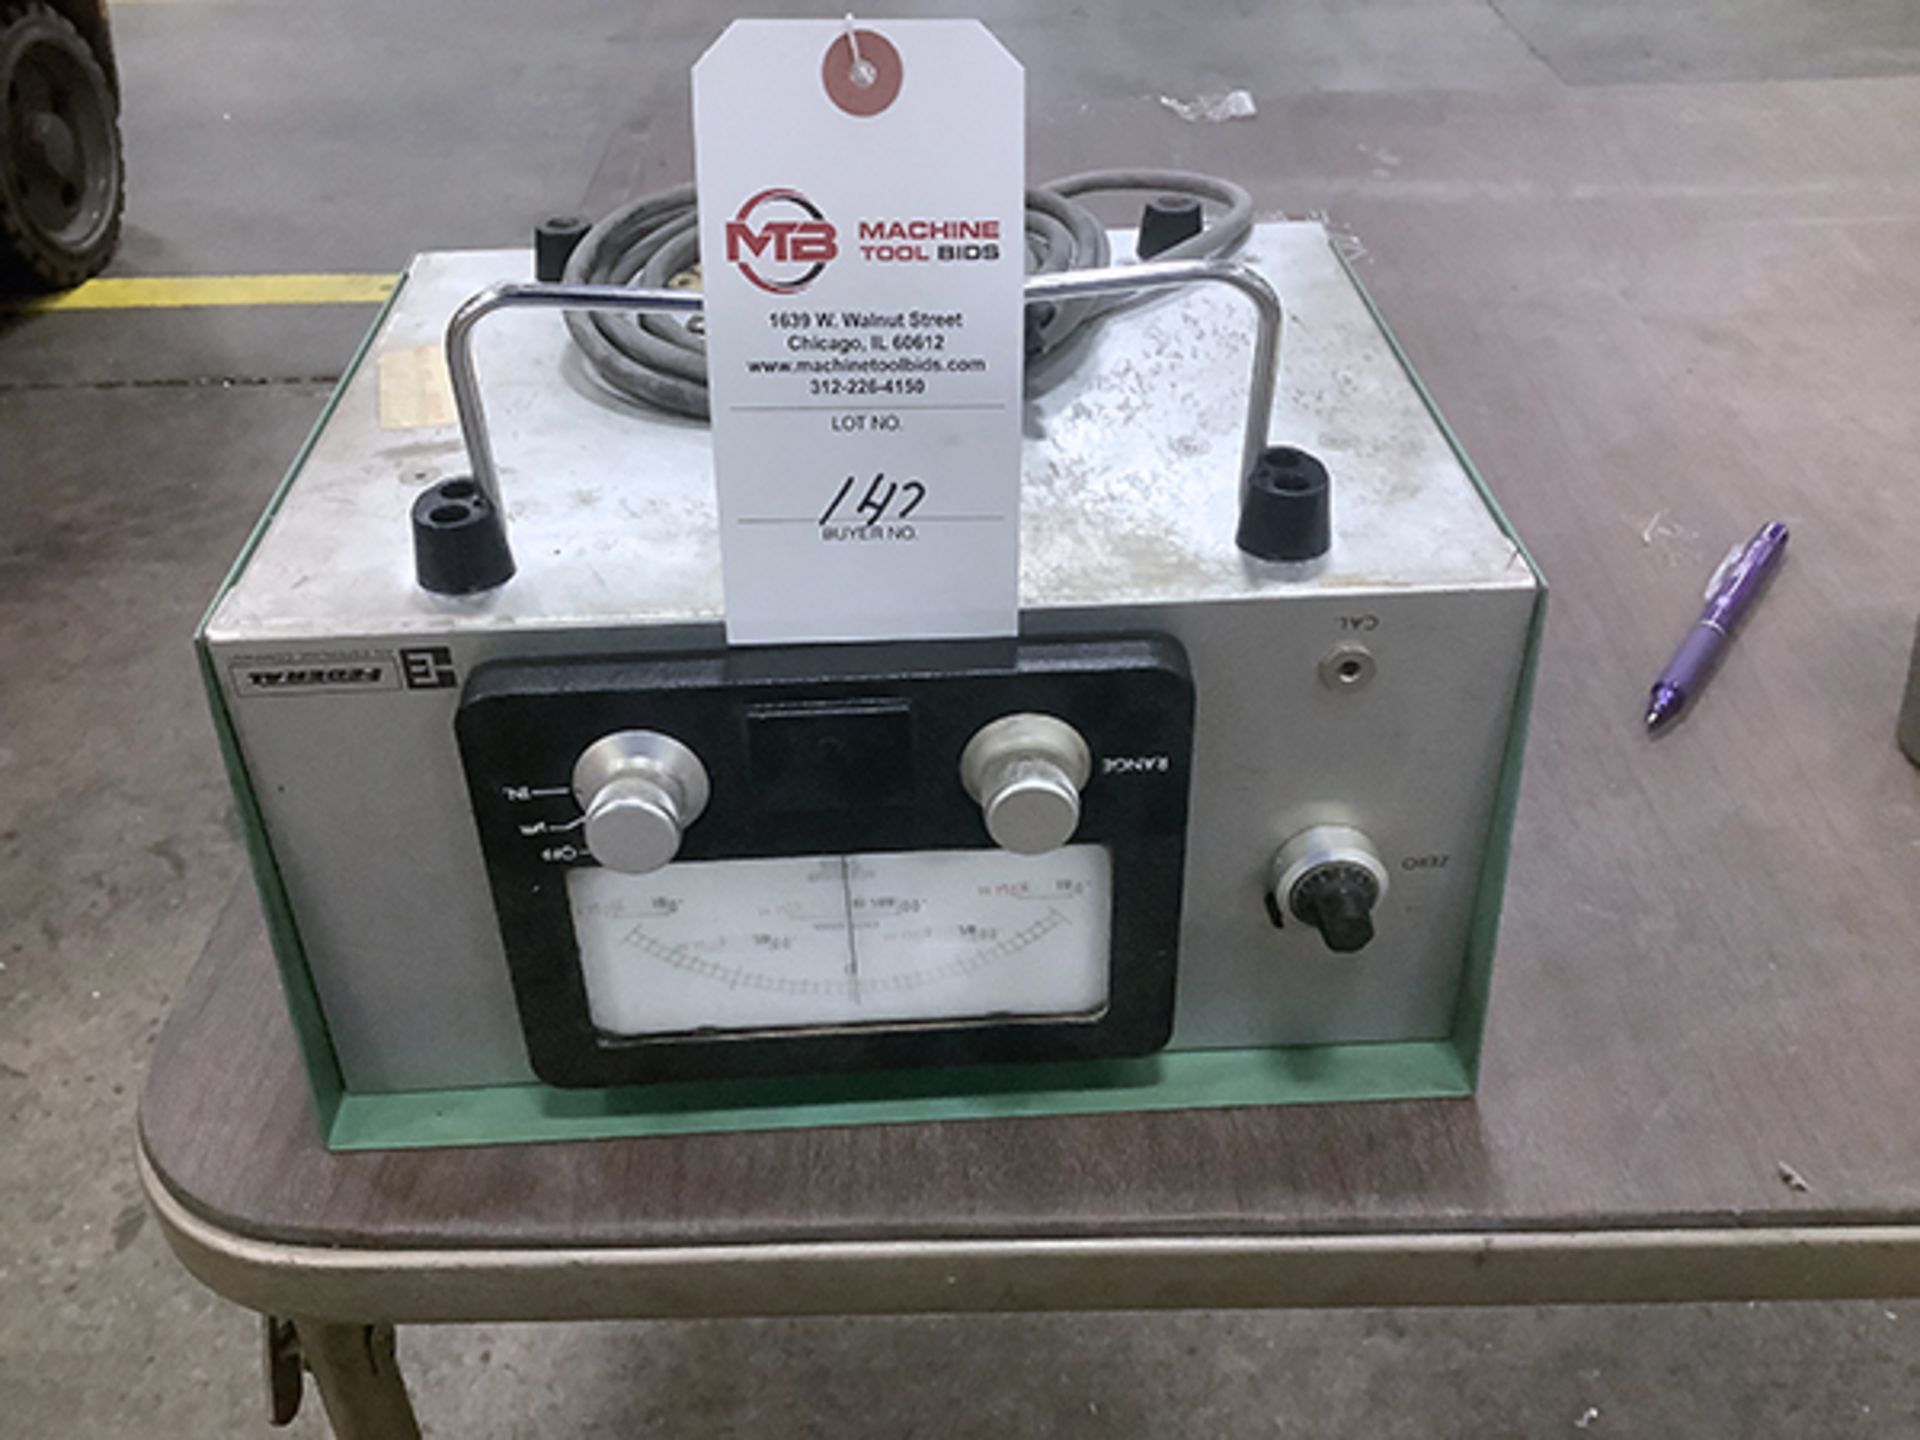 Federal EAS-1460 Gage Amplifier